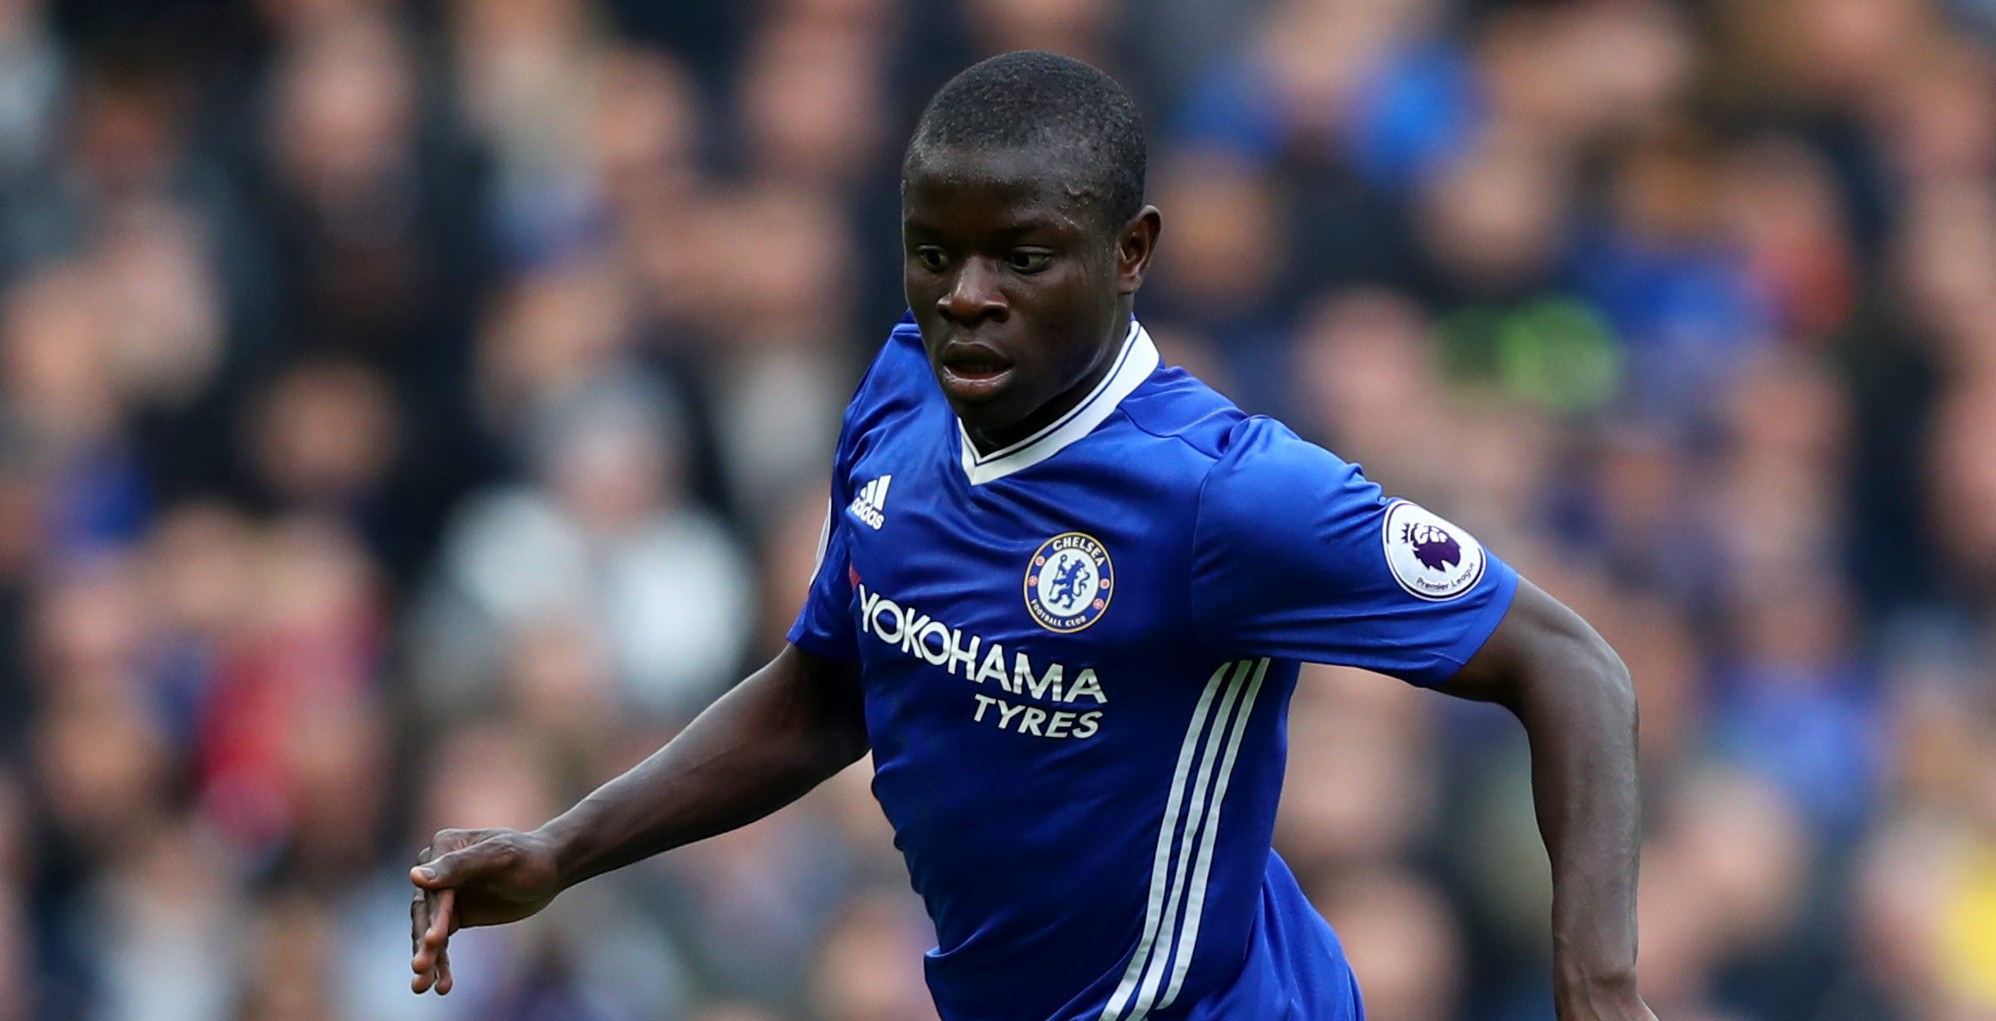 Ngolo Kante failed to make any impact in the midfield for Chelsea. (Photo by Clive Rose/Getty Images)